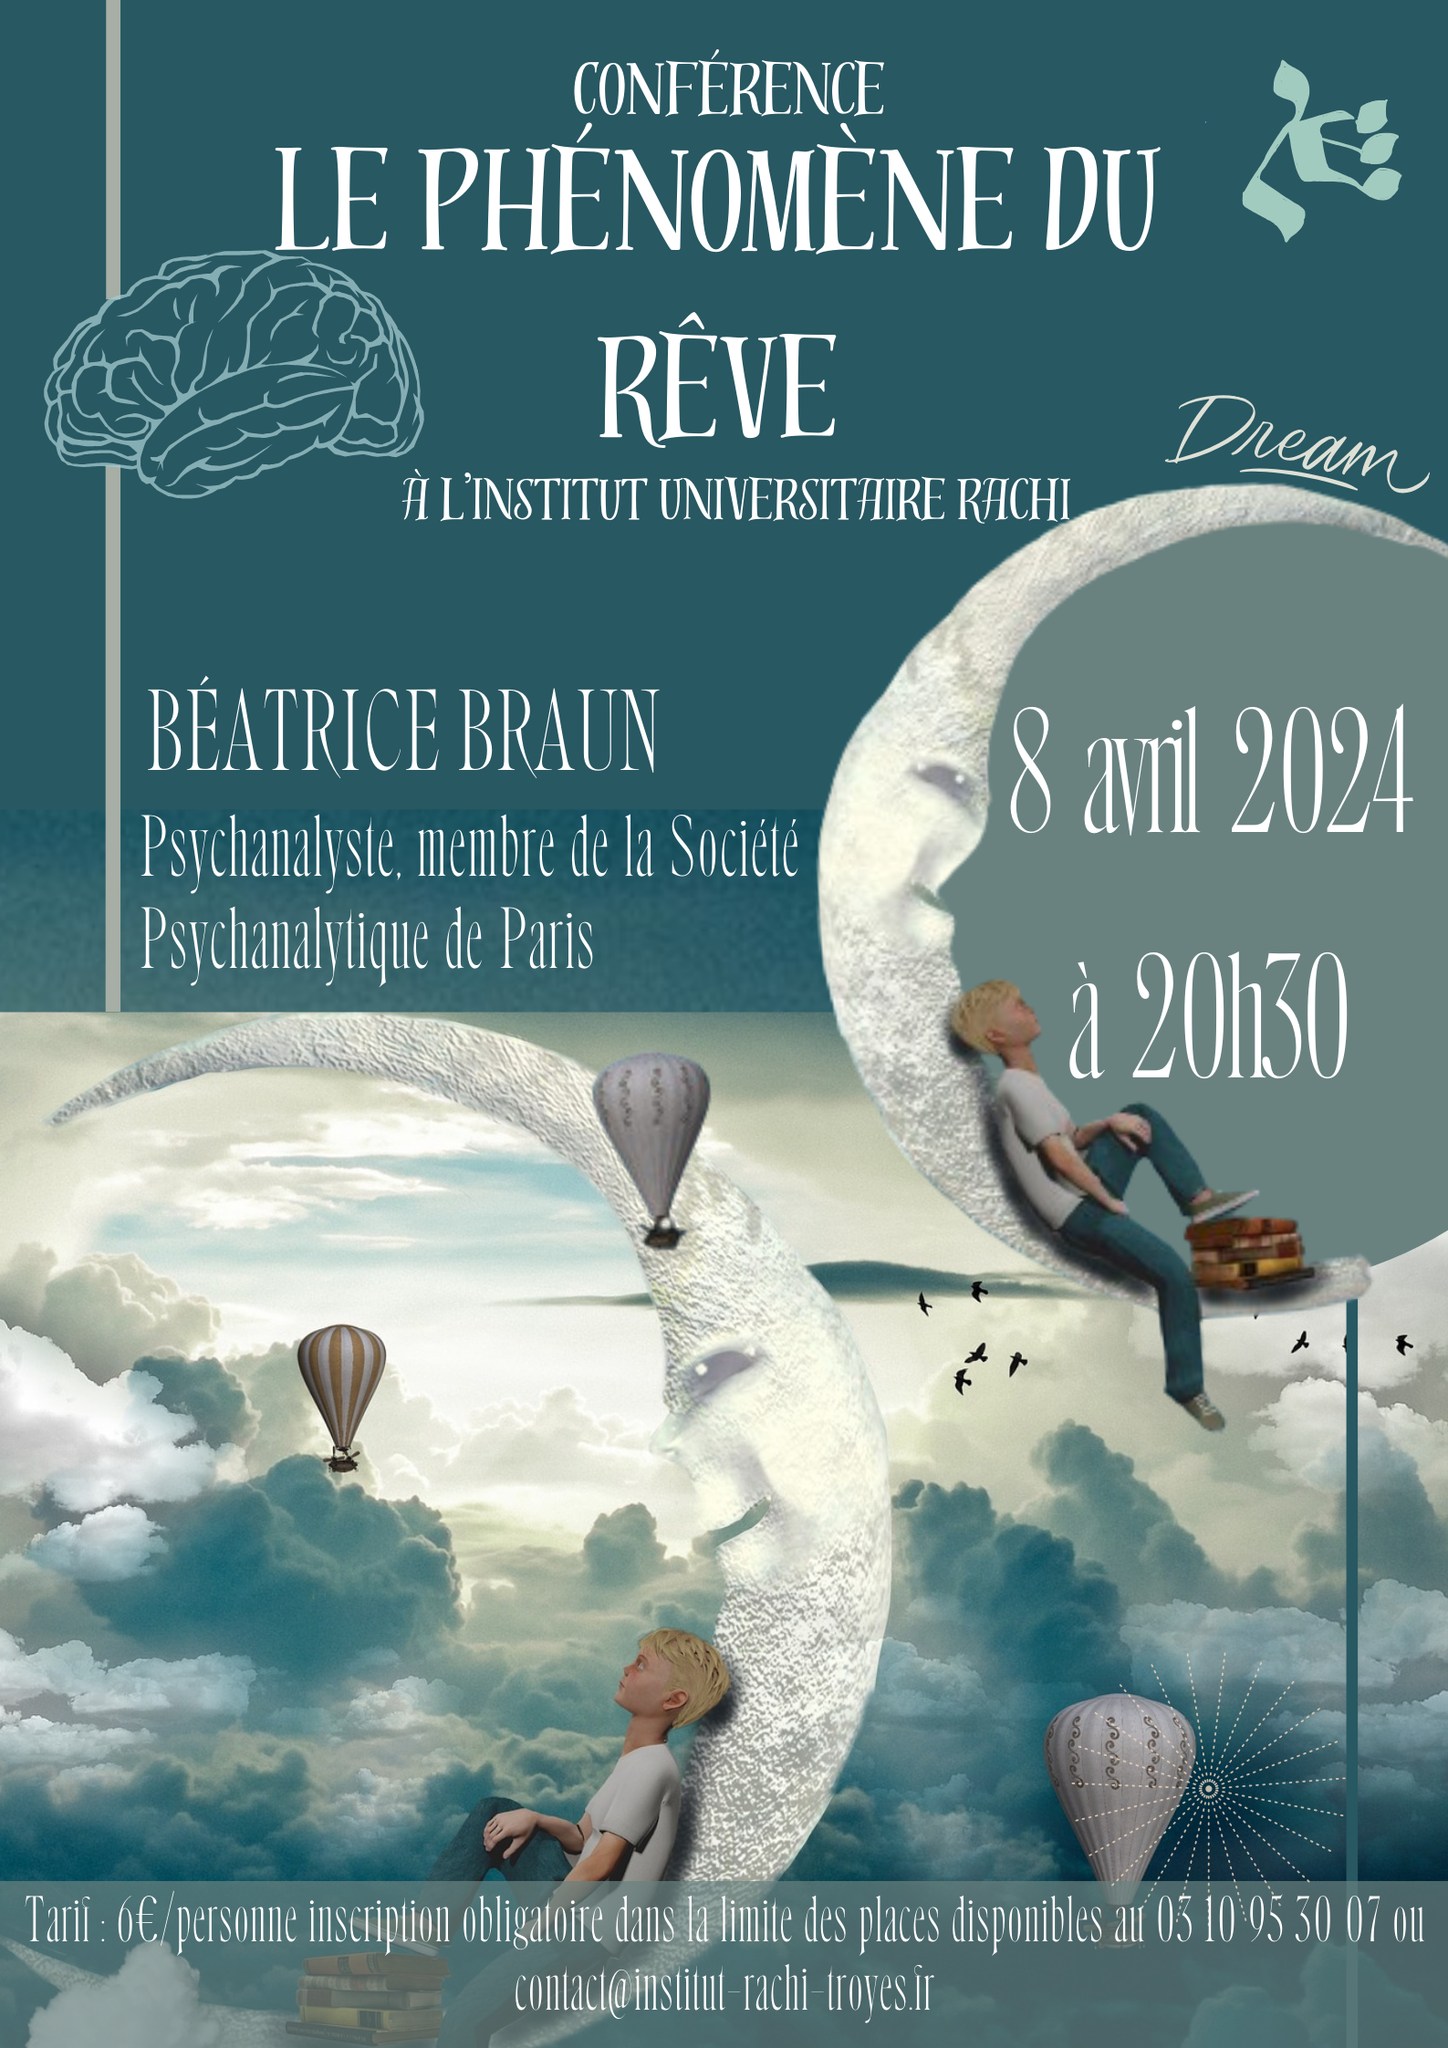 Approches psychanalytiques